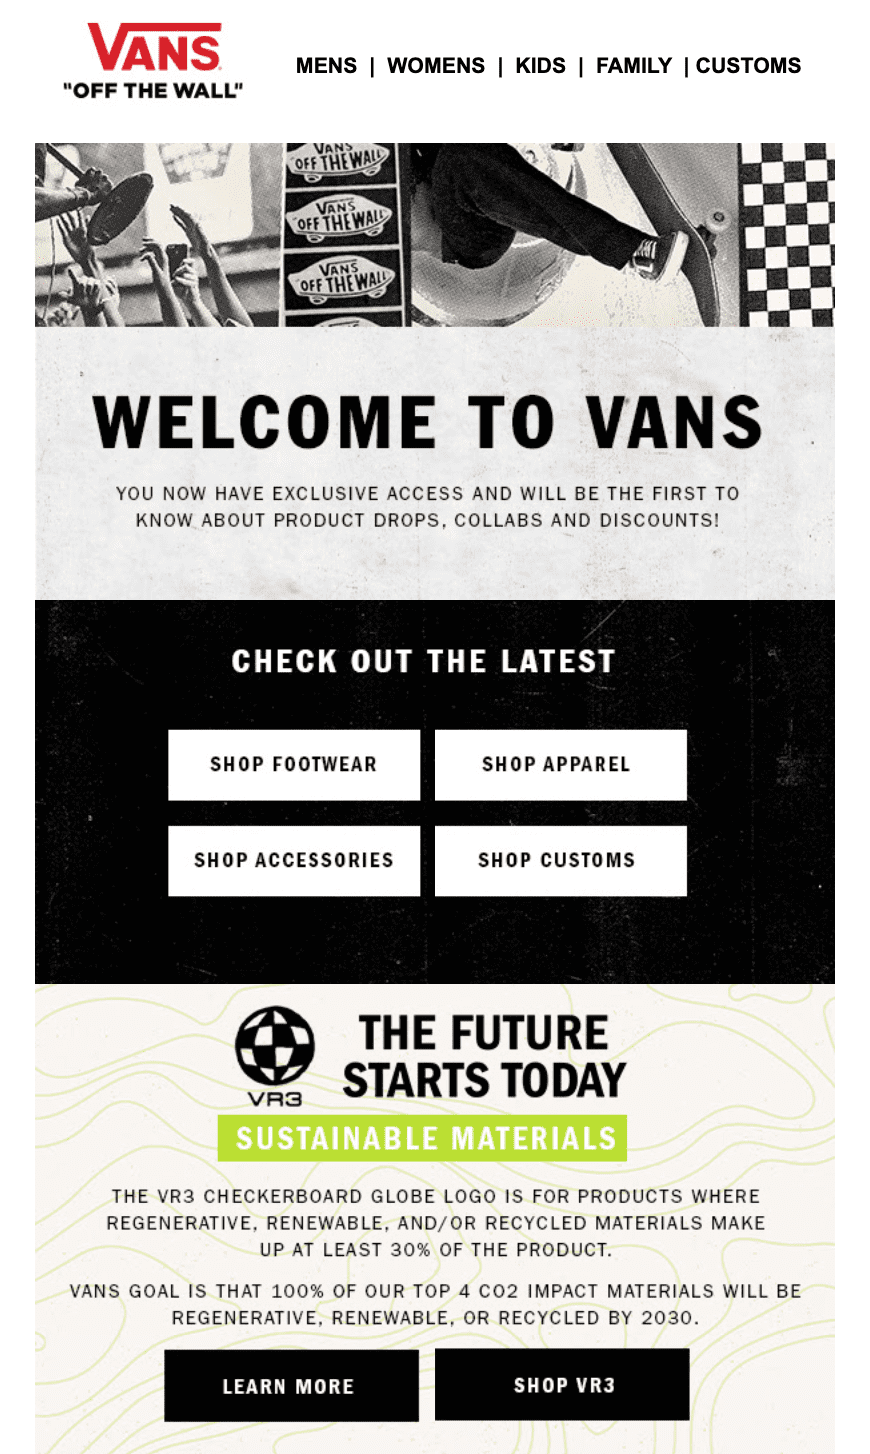 Welcome targeted email marketing campaign example from Vans